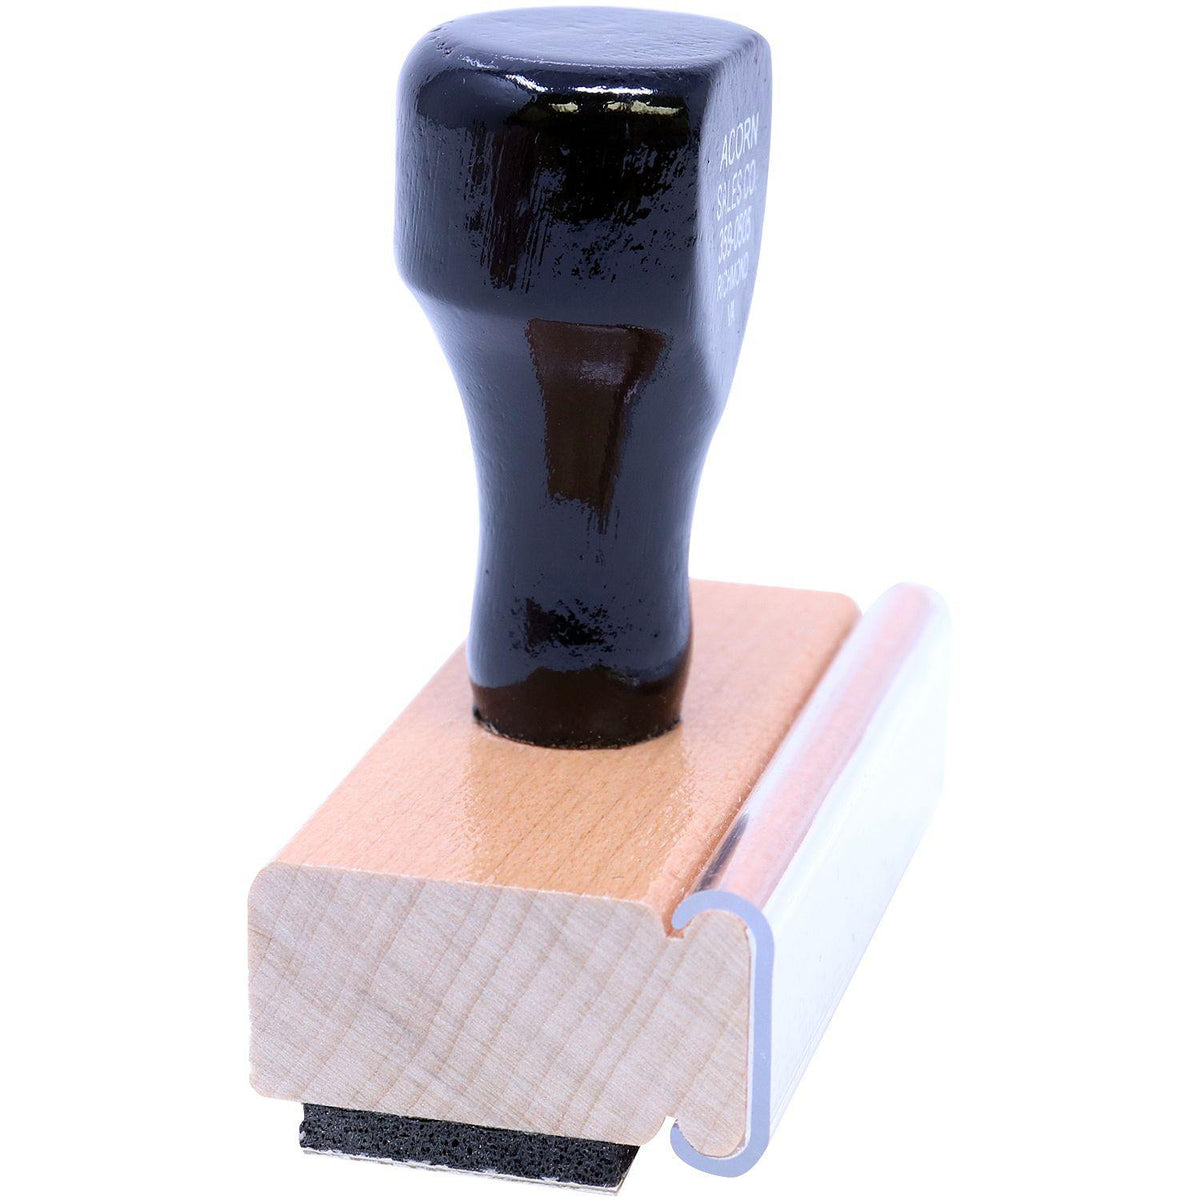 Side View of E Mail Rubber Stamp at an Angle